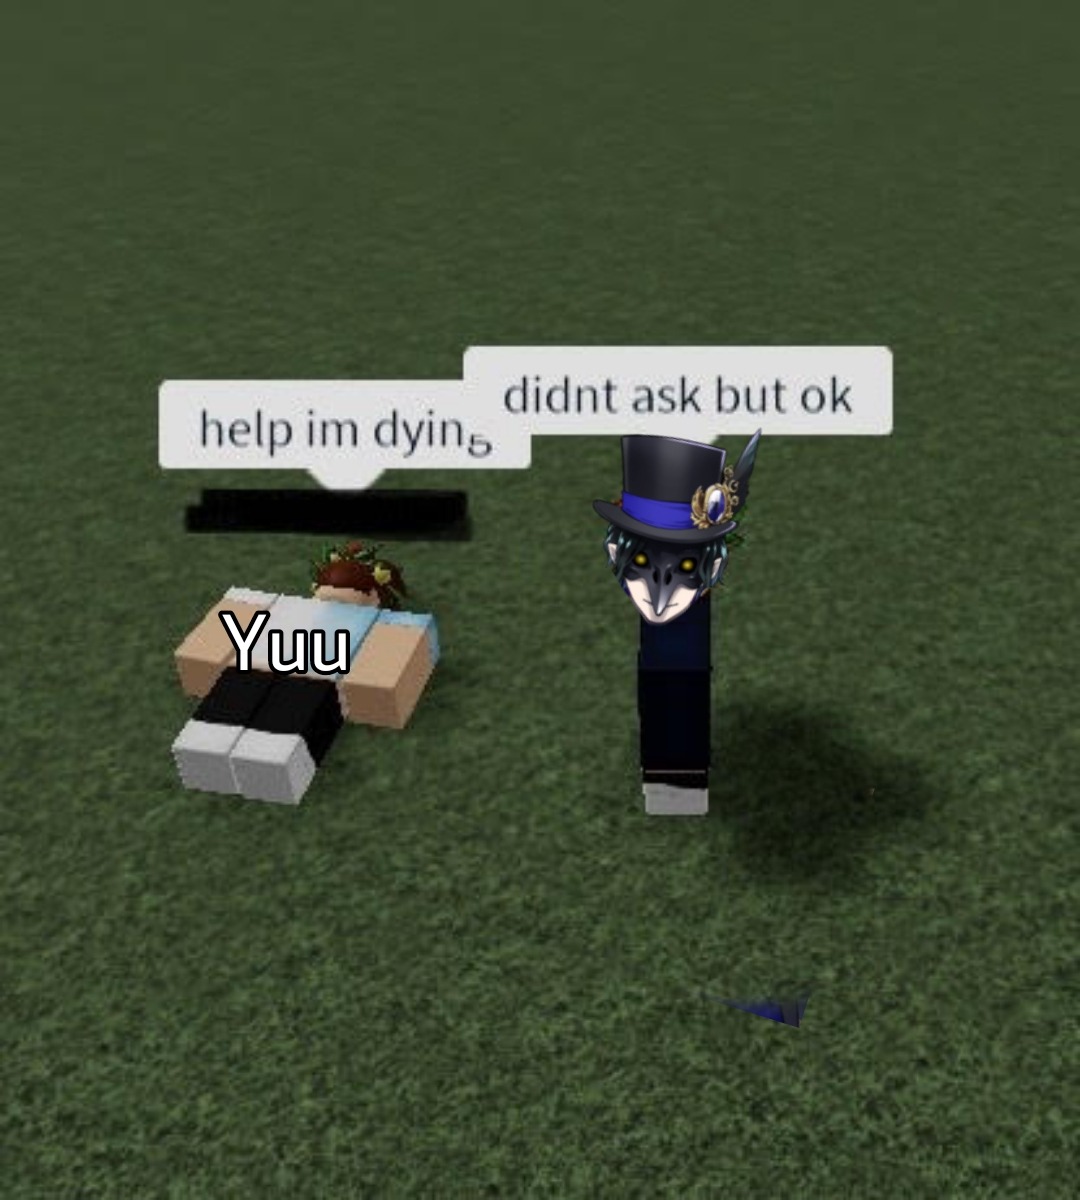 𝙖𝙣𝙧𝙞 Twisted Wonderland As Cursed Roblox Images Bc I - cursed roblox images reddit